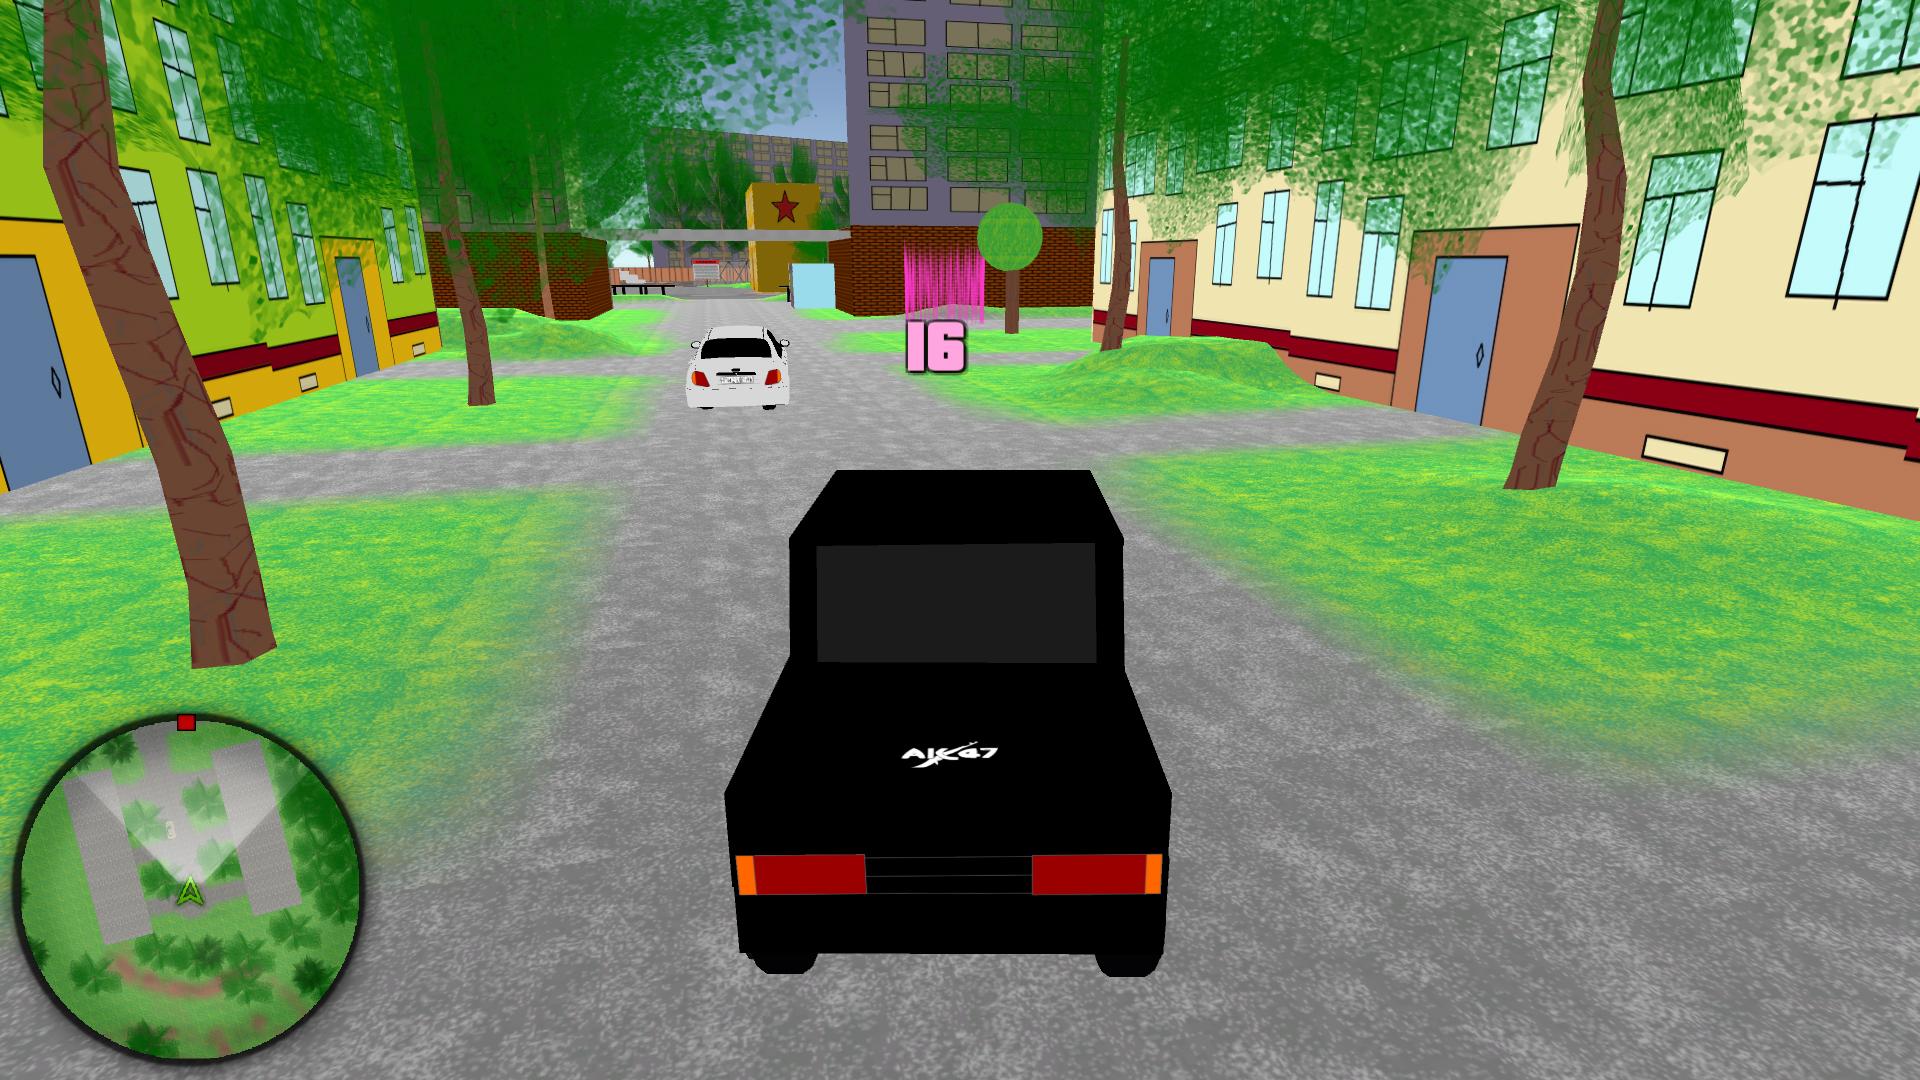 Screenshot №9 from game VCB: Why City (Beta Version)